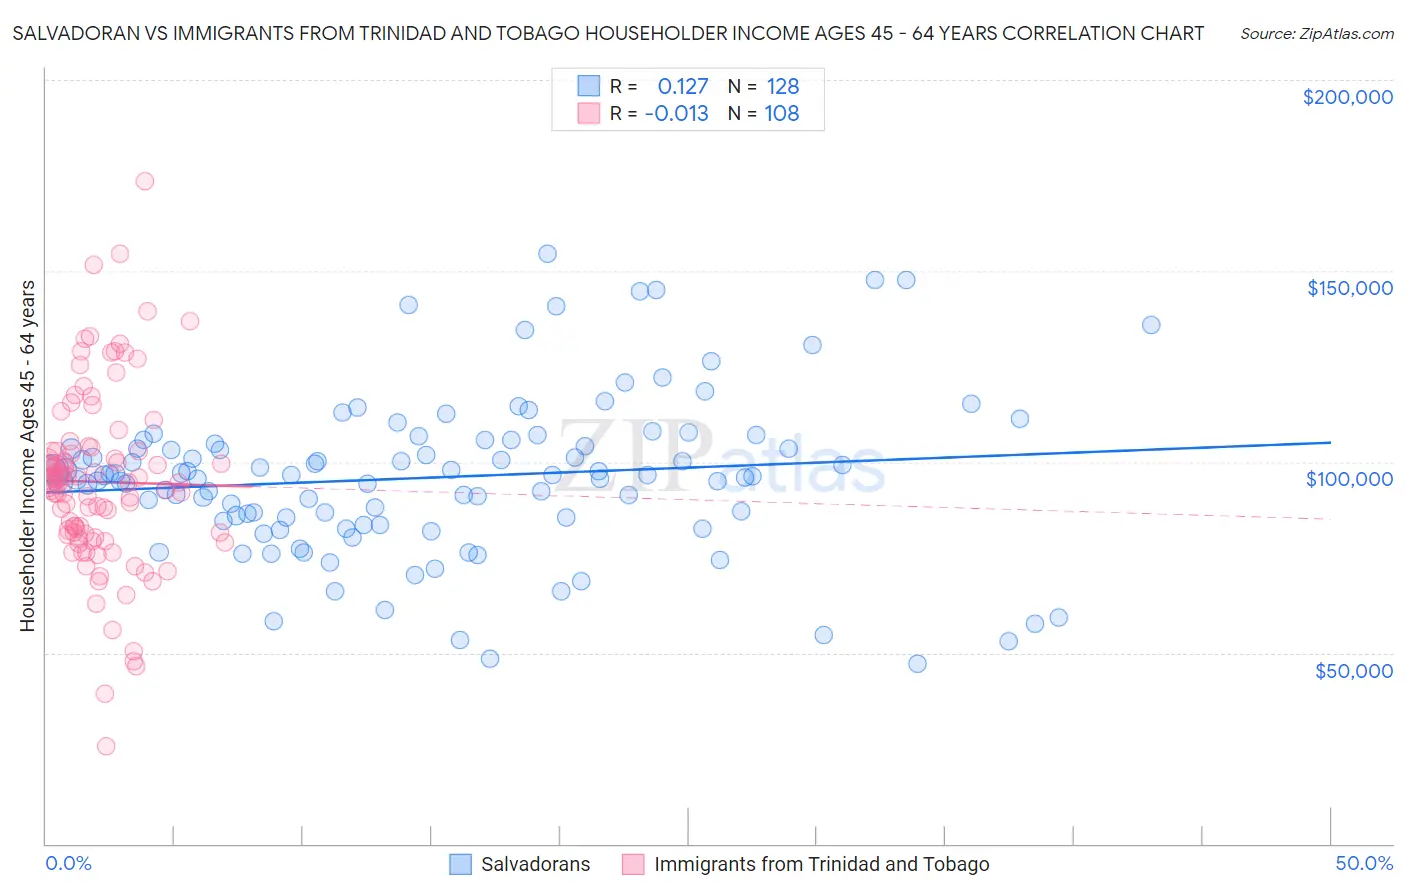 Salvadoran vs Immigrants from Trinidad and Tobago Householder Income Ages 45 - 64 years